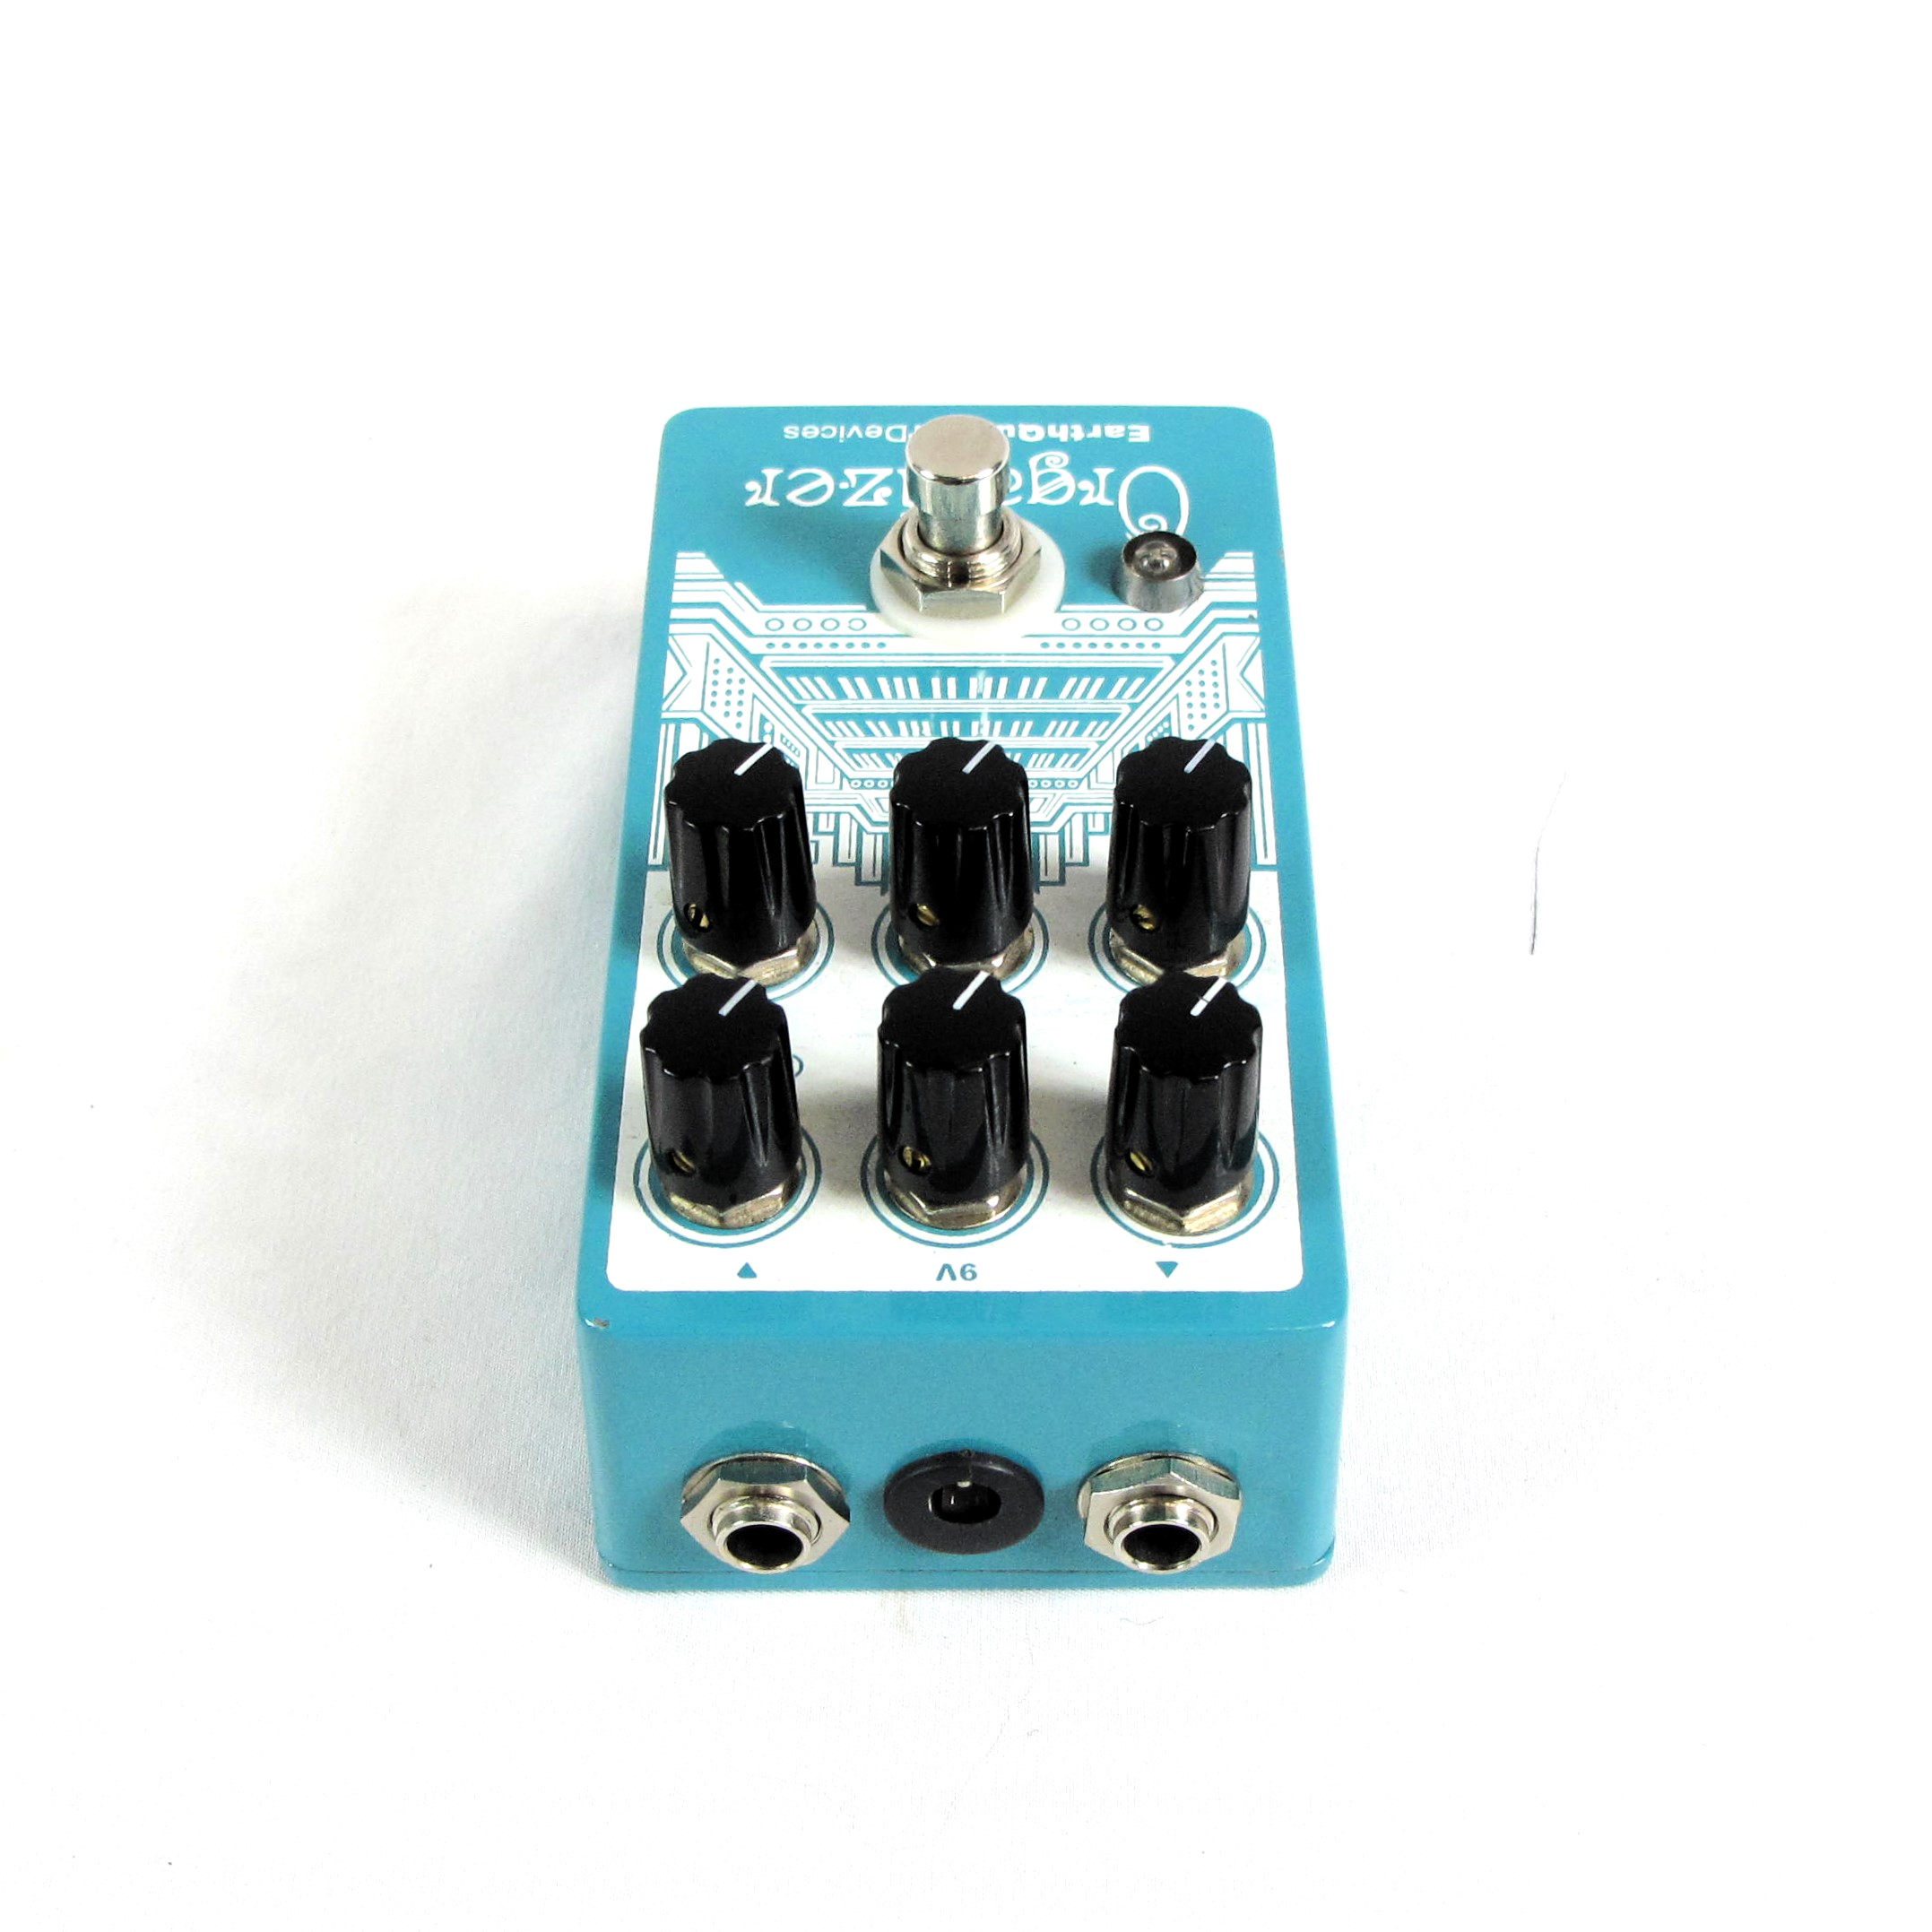 Earthquaker Devices Organizer Polyphonic Organ Emulator Used At